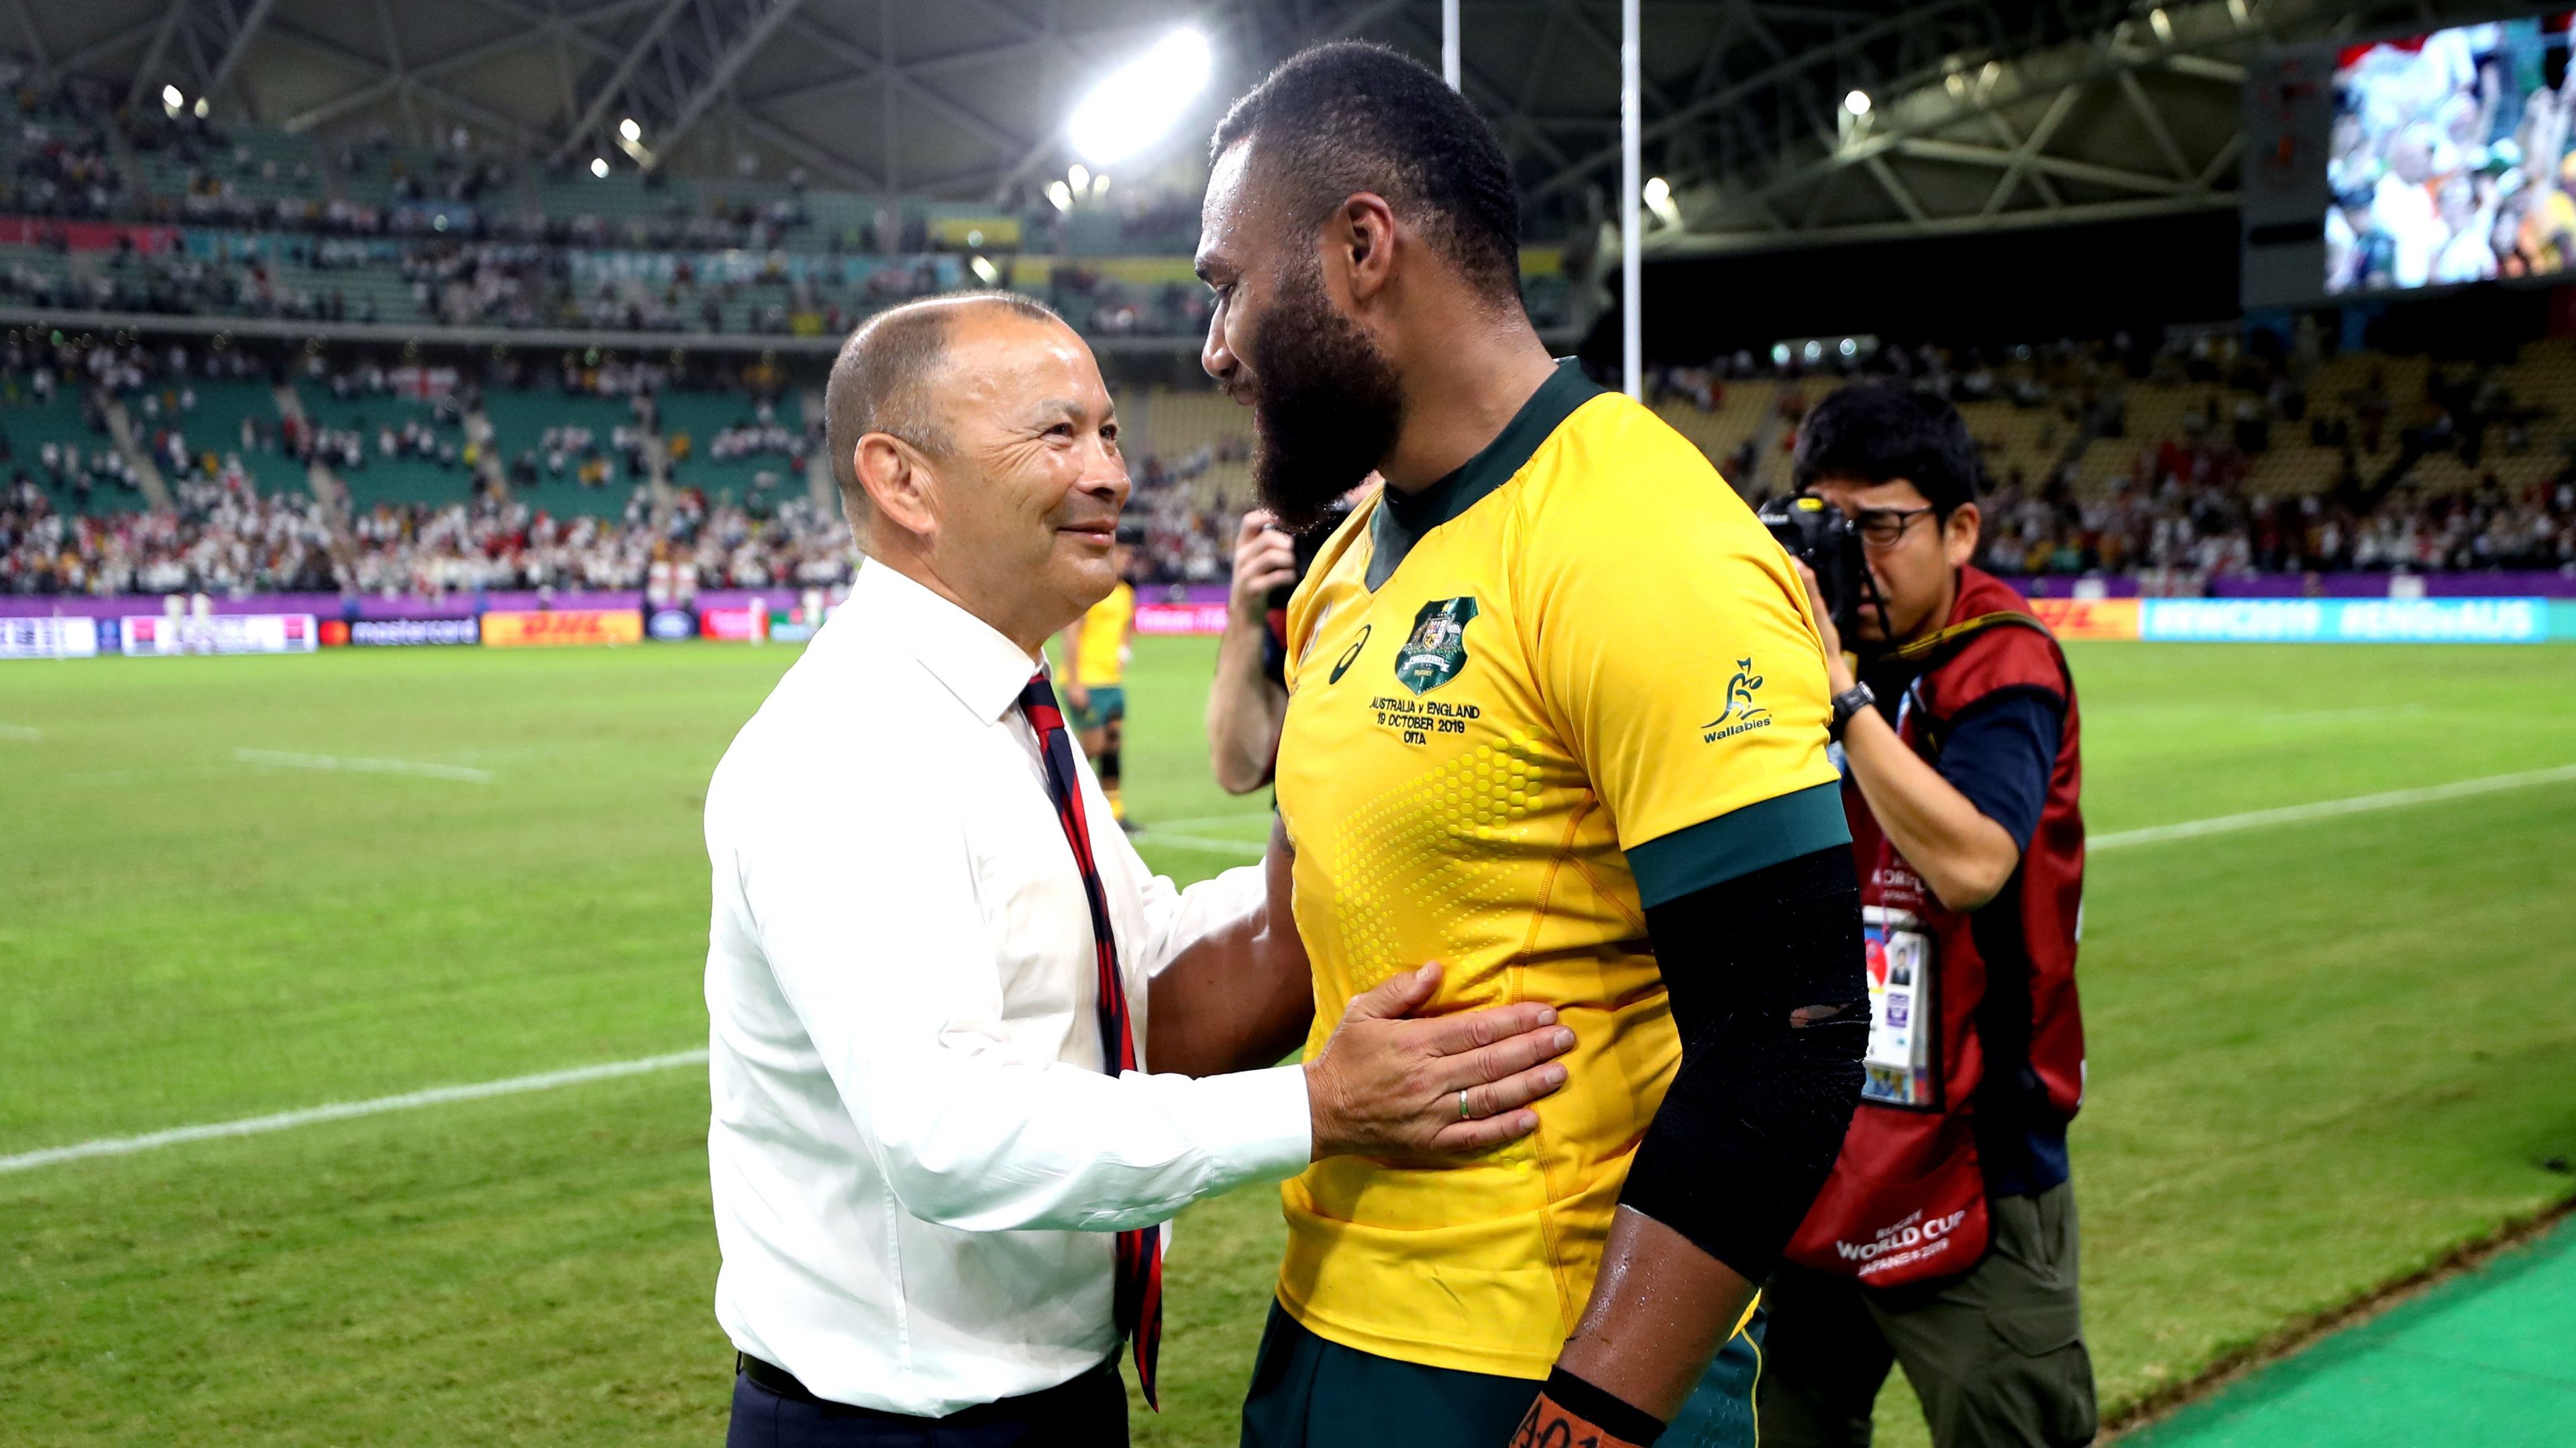 Then-England head coach Eddie Jones (left) speaks to Australia&#x27;s Samu Kerevi at the end of the 2019 Rugby World Cup quarter final.